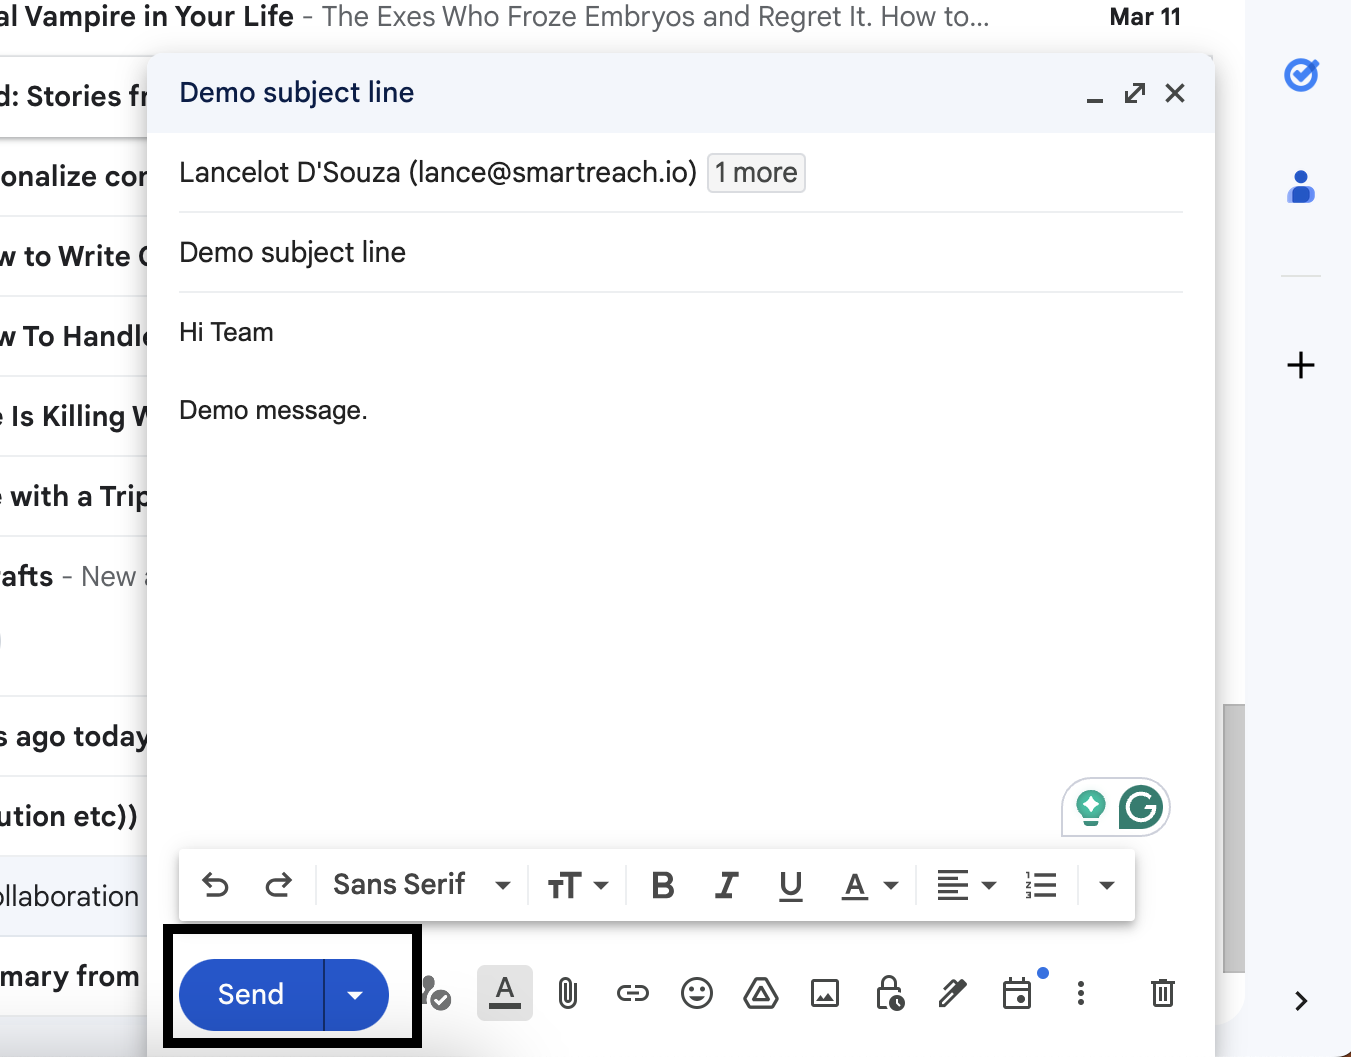 How to create a group in Gmail